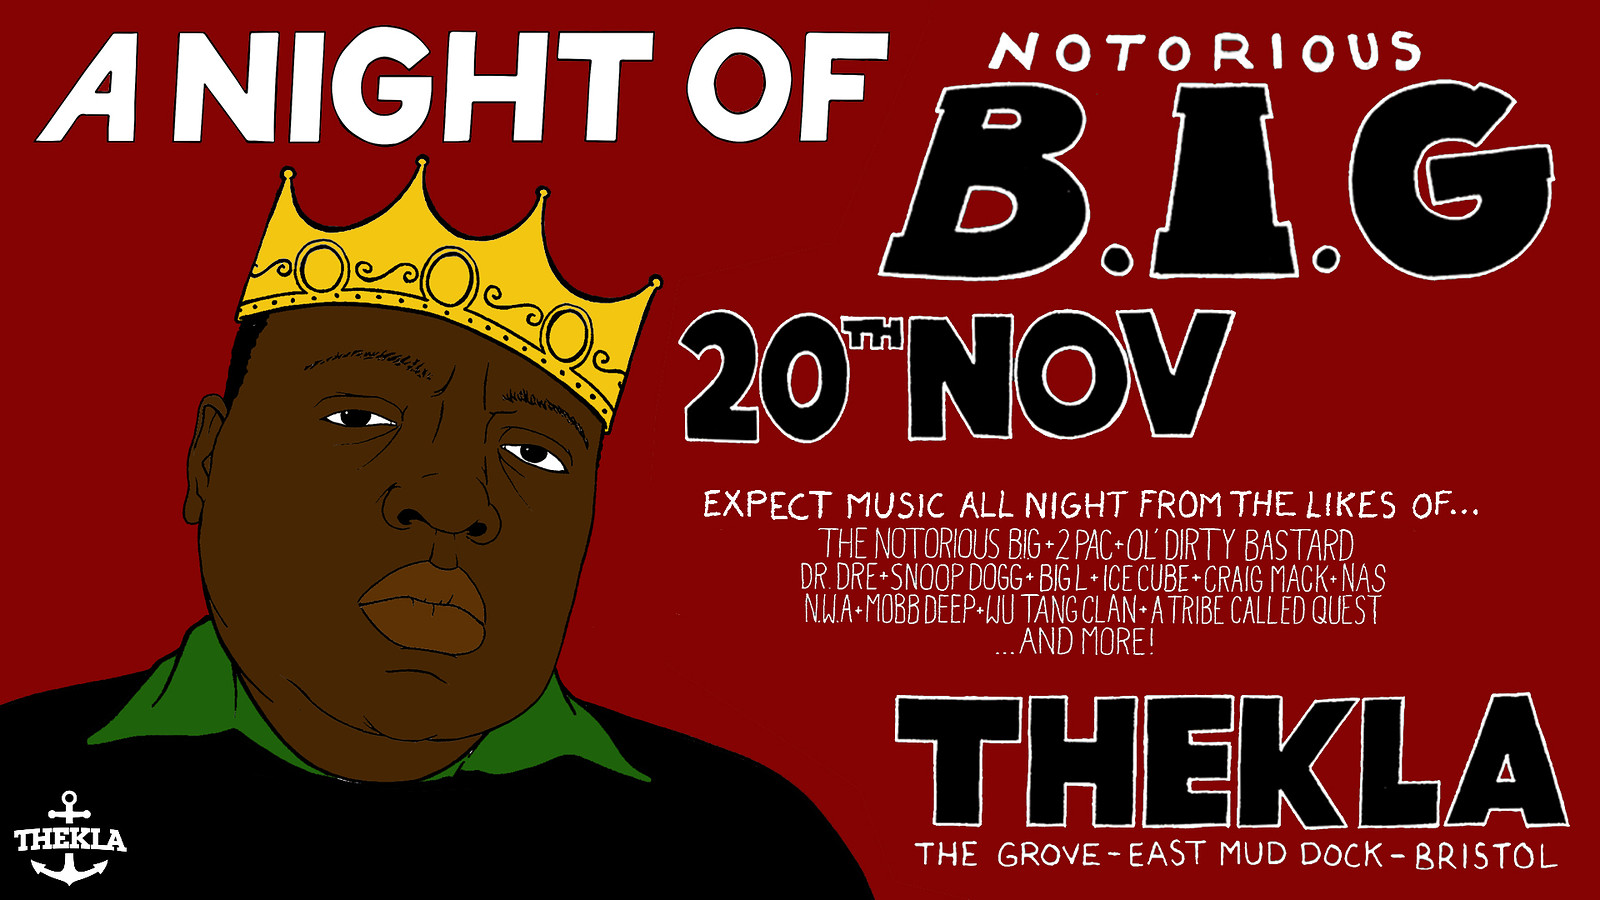 A Night Of: The Notorious B.I.G at Thekla